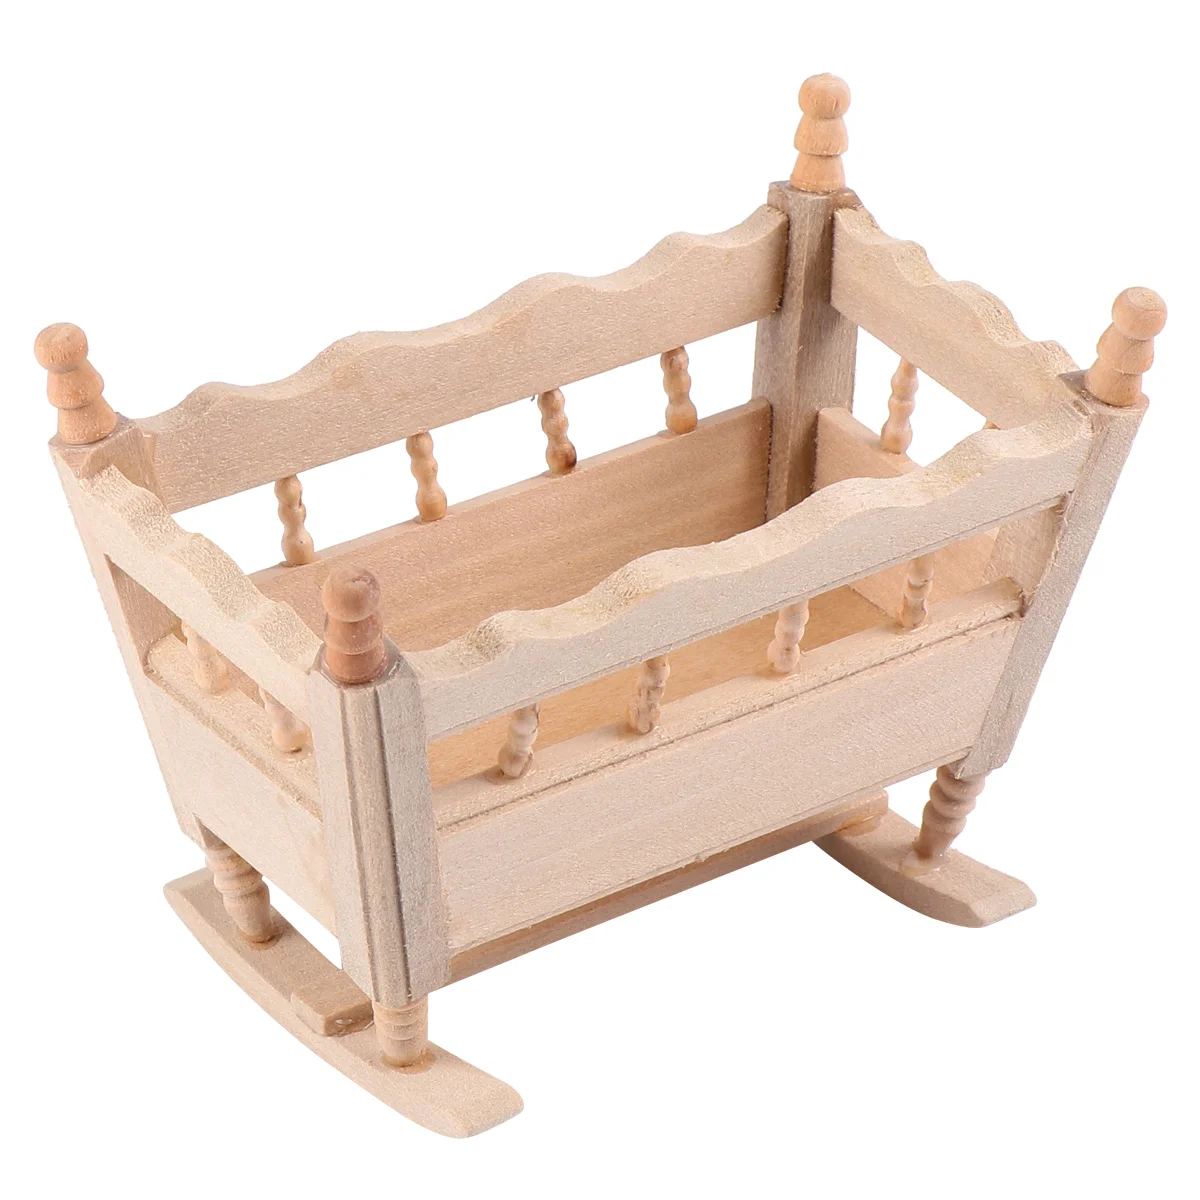 

Doll Wooden Baby Cradle Cribs Crib Cradles And Dollhouse Beds